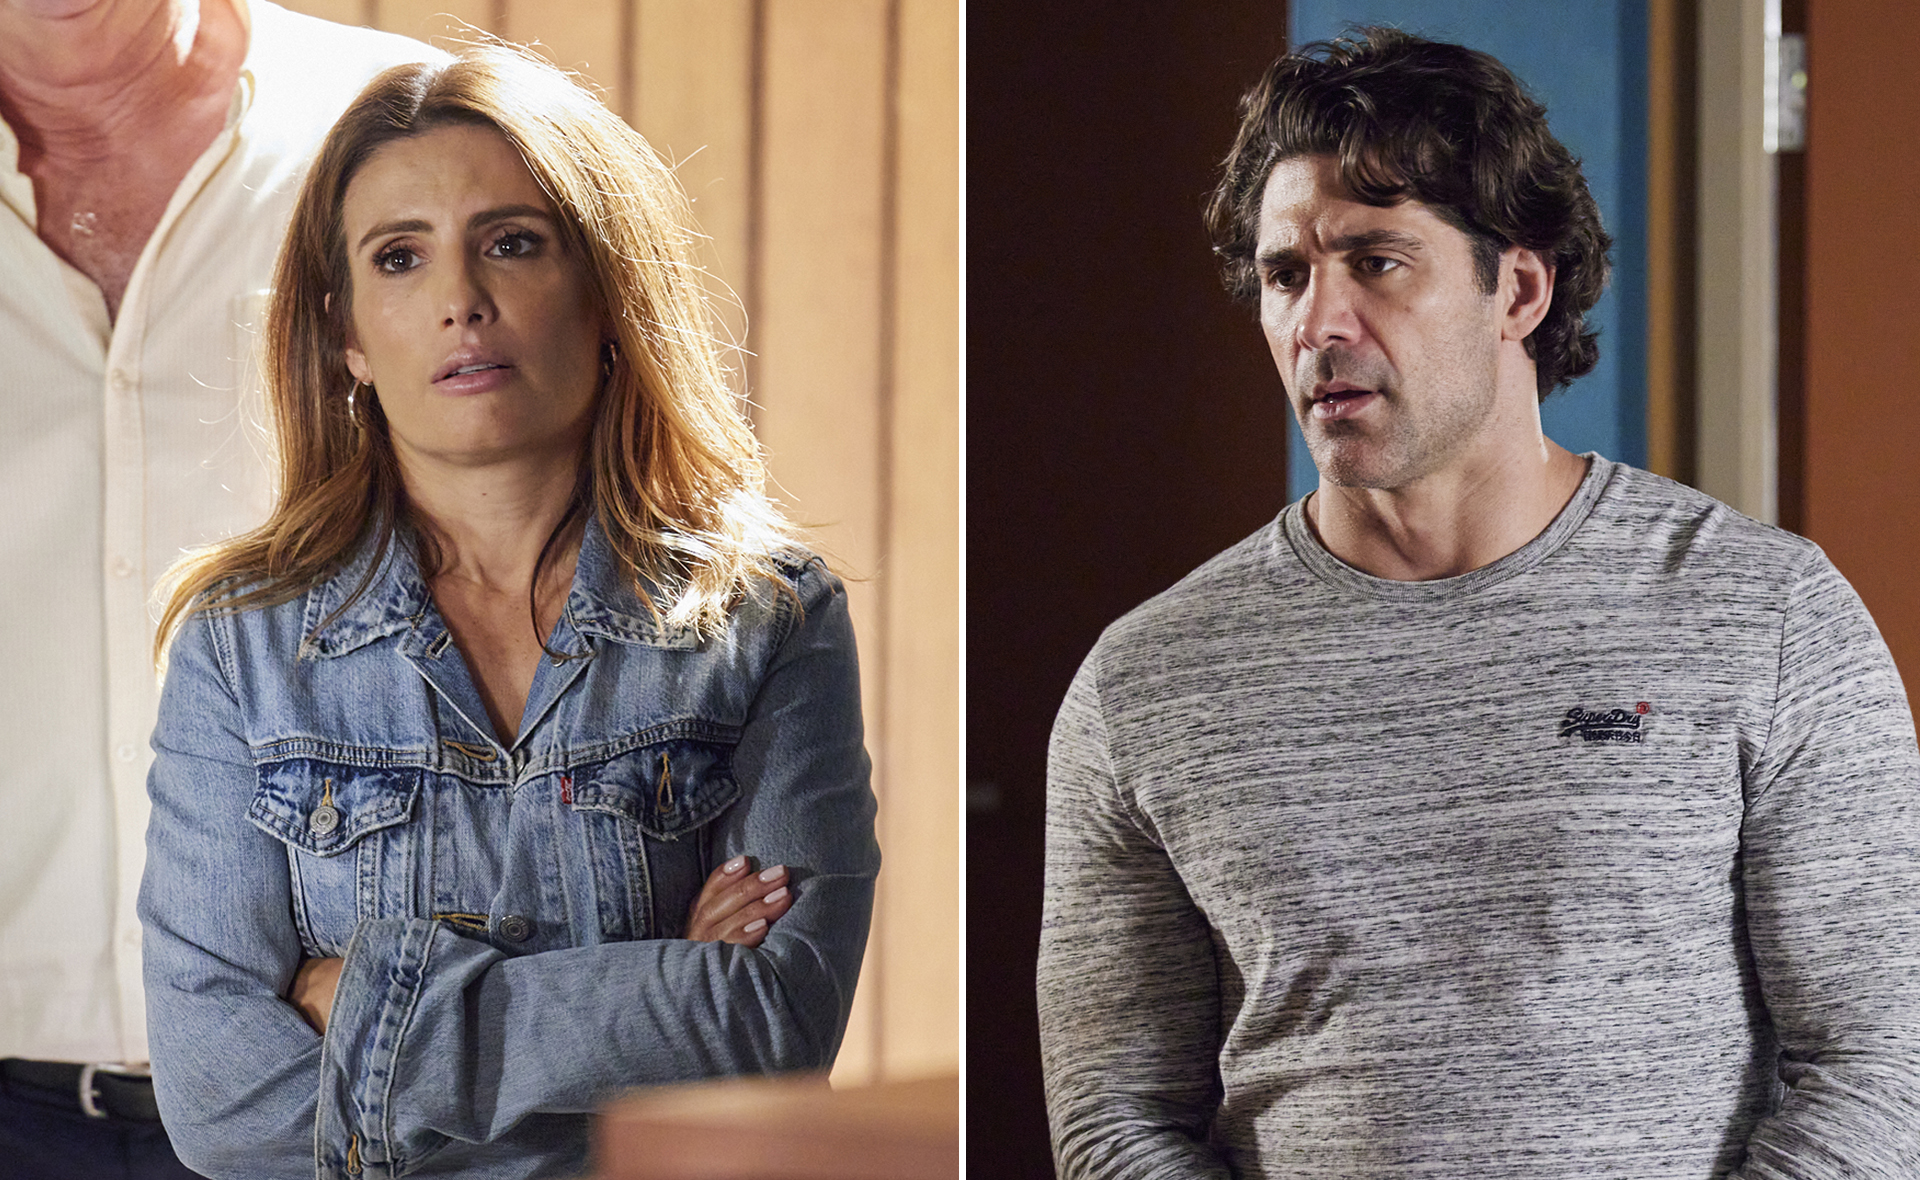 EXCLUSIVE: Home And Away’s killer was caught, but only after making Leah a shocking offer